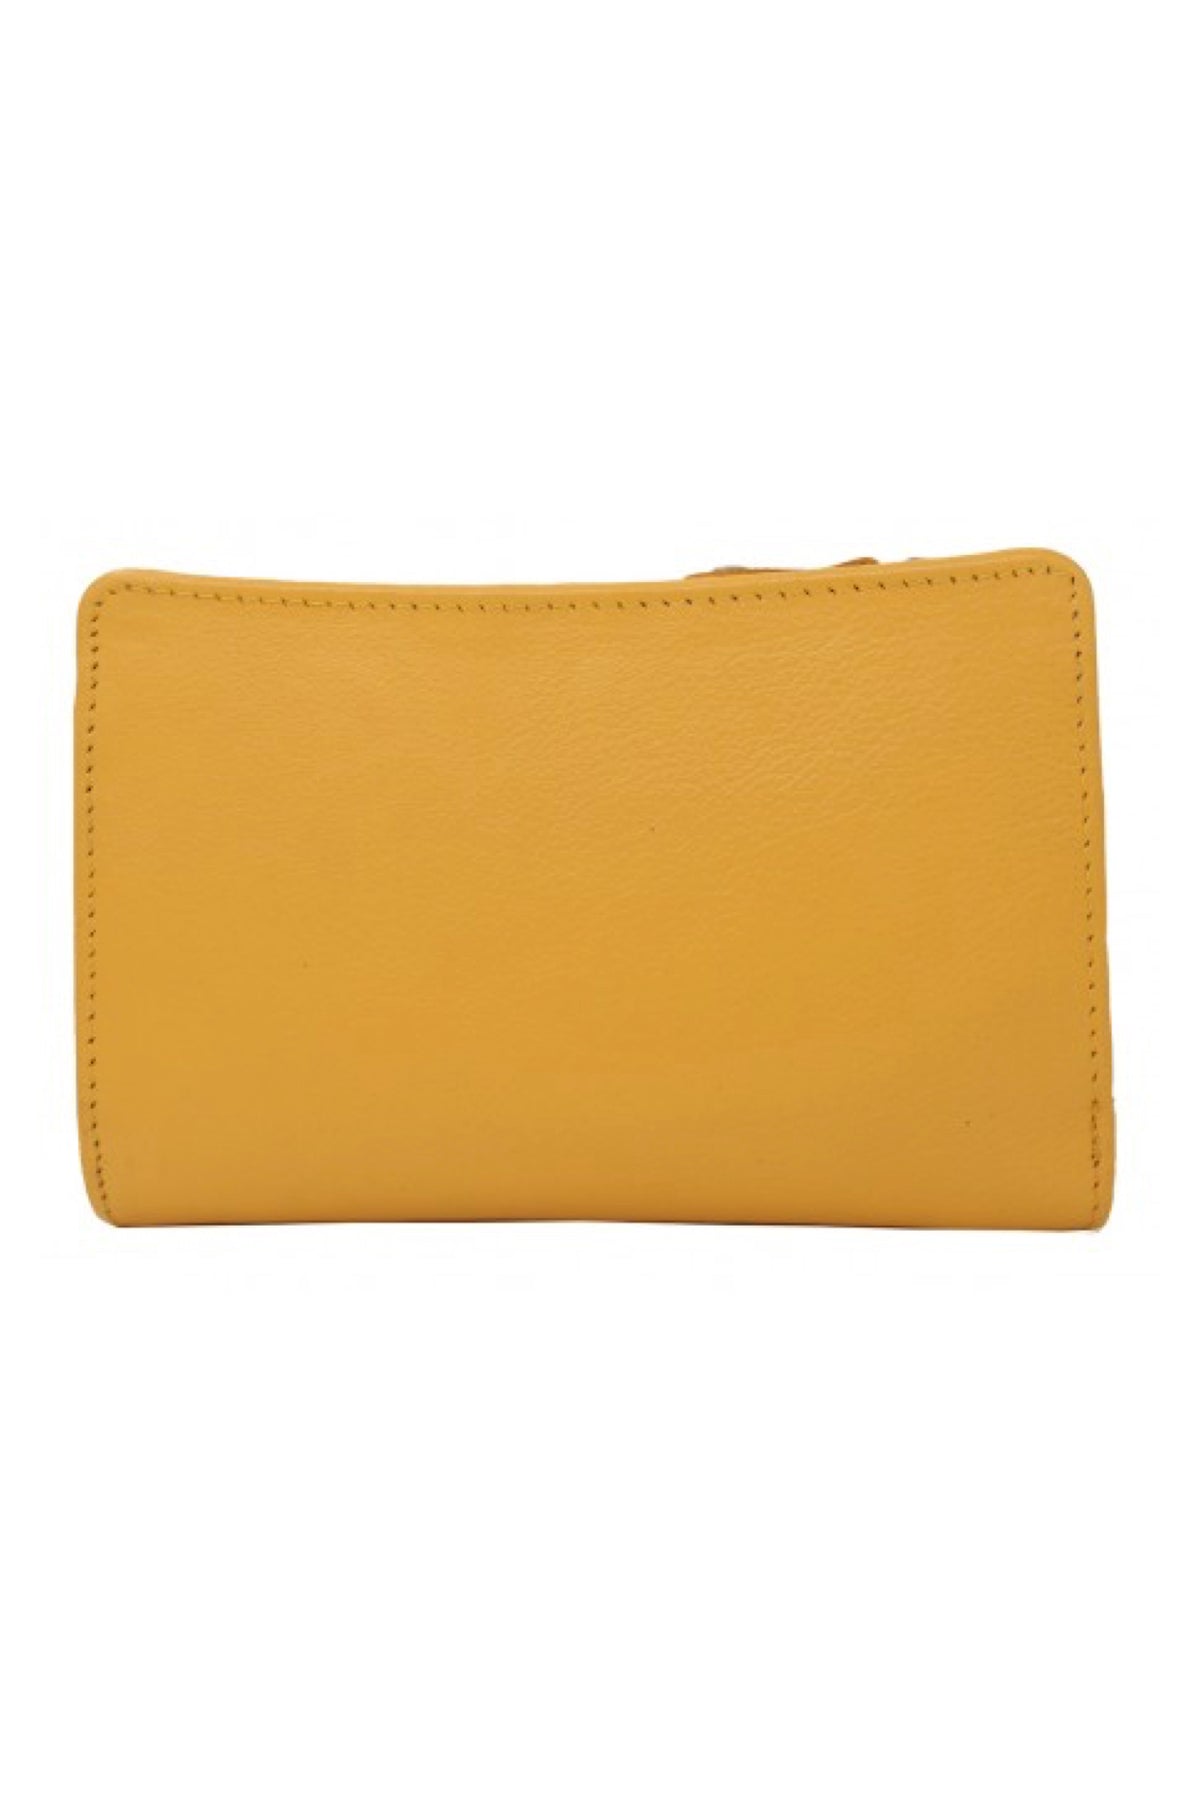 Cocoa Wallet Yellow